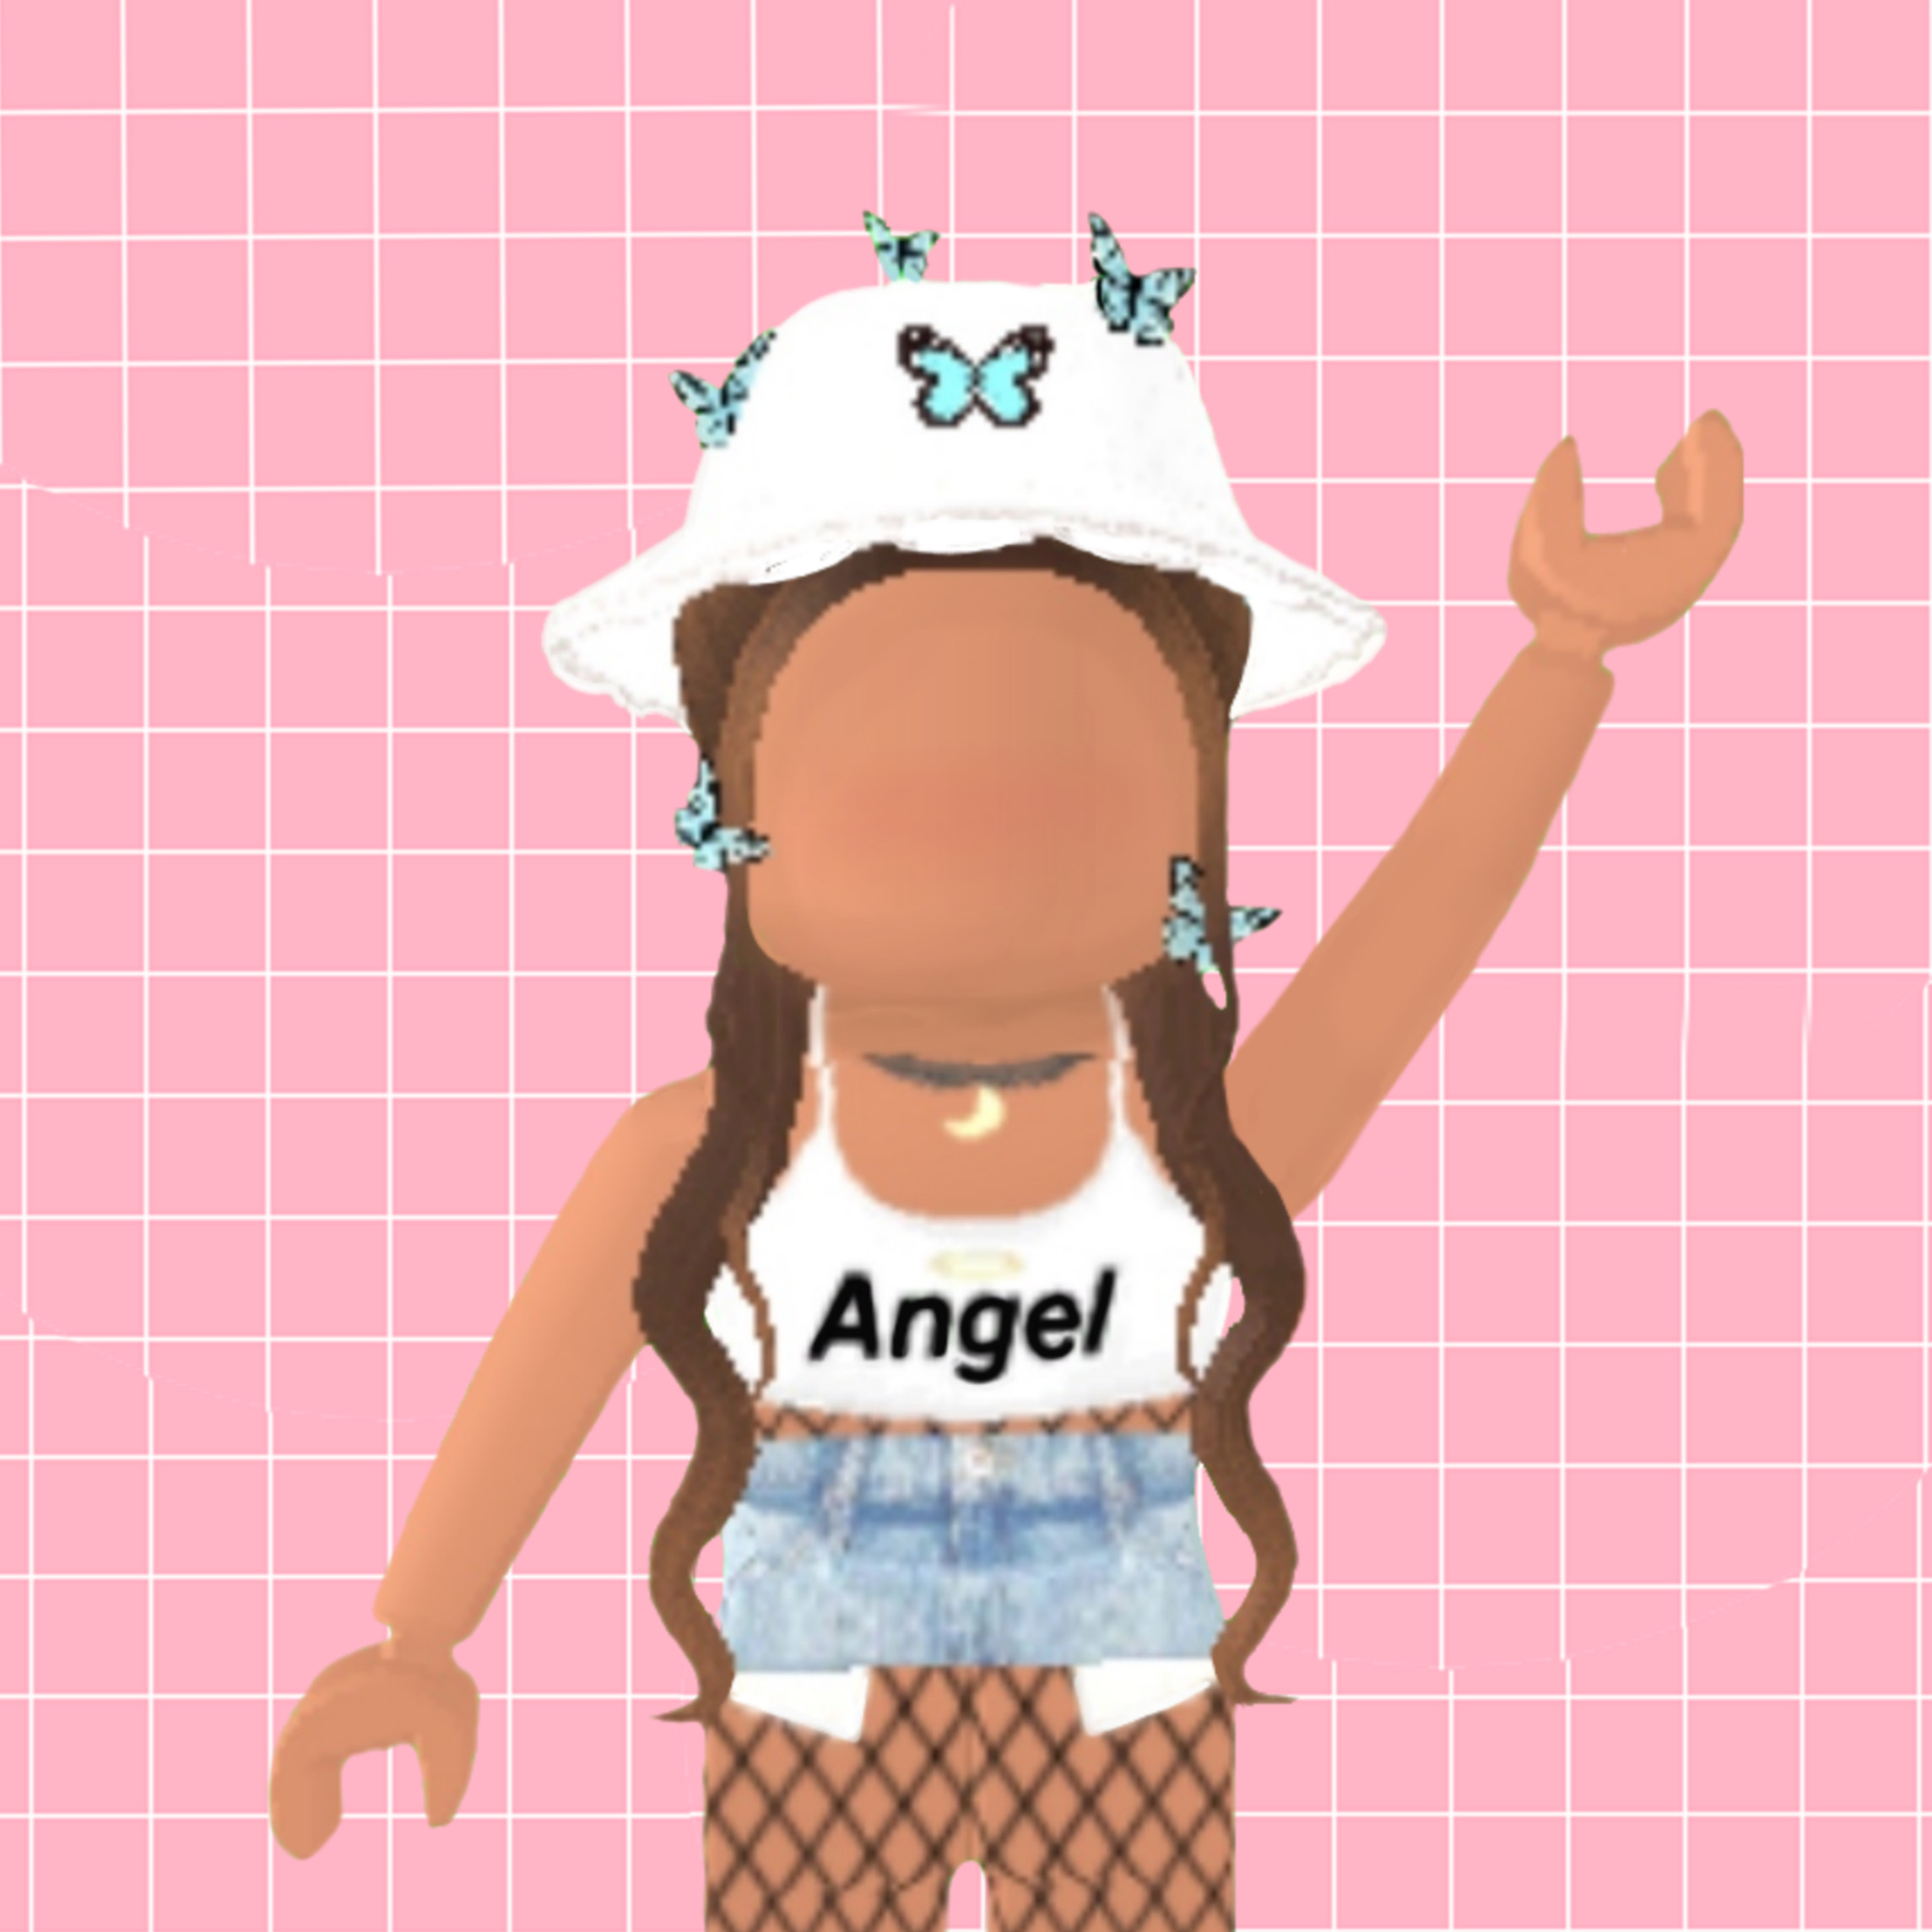 Roblox Angle Butterfly Blue Image By 𝕃𝕠𝕧𝕝𝕖𝕪 - roblox blue aesthetic awe image by 𝕃𝕠𝕧𝕝𝕖𝕪